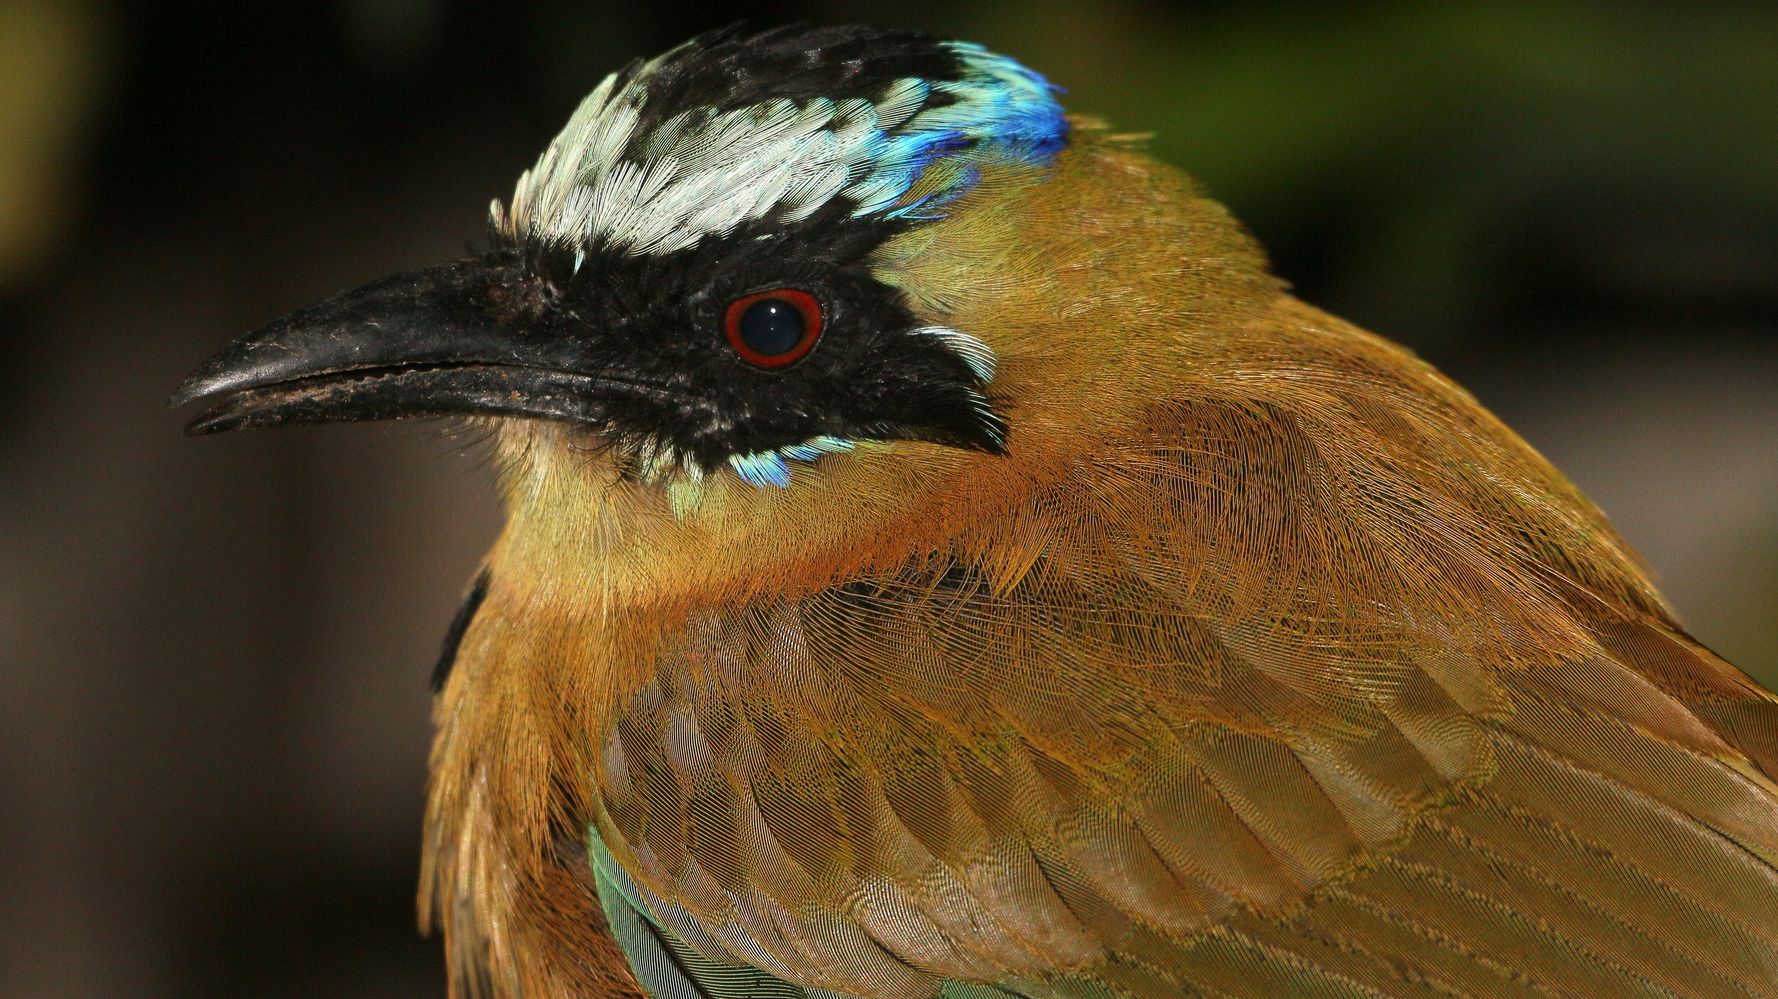 Birds In The Amazon Rainforest Are Shrinking As Temperatures Rise